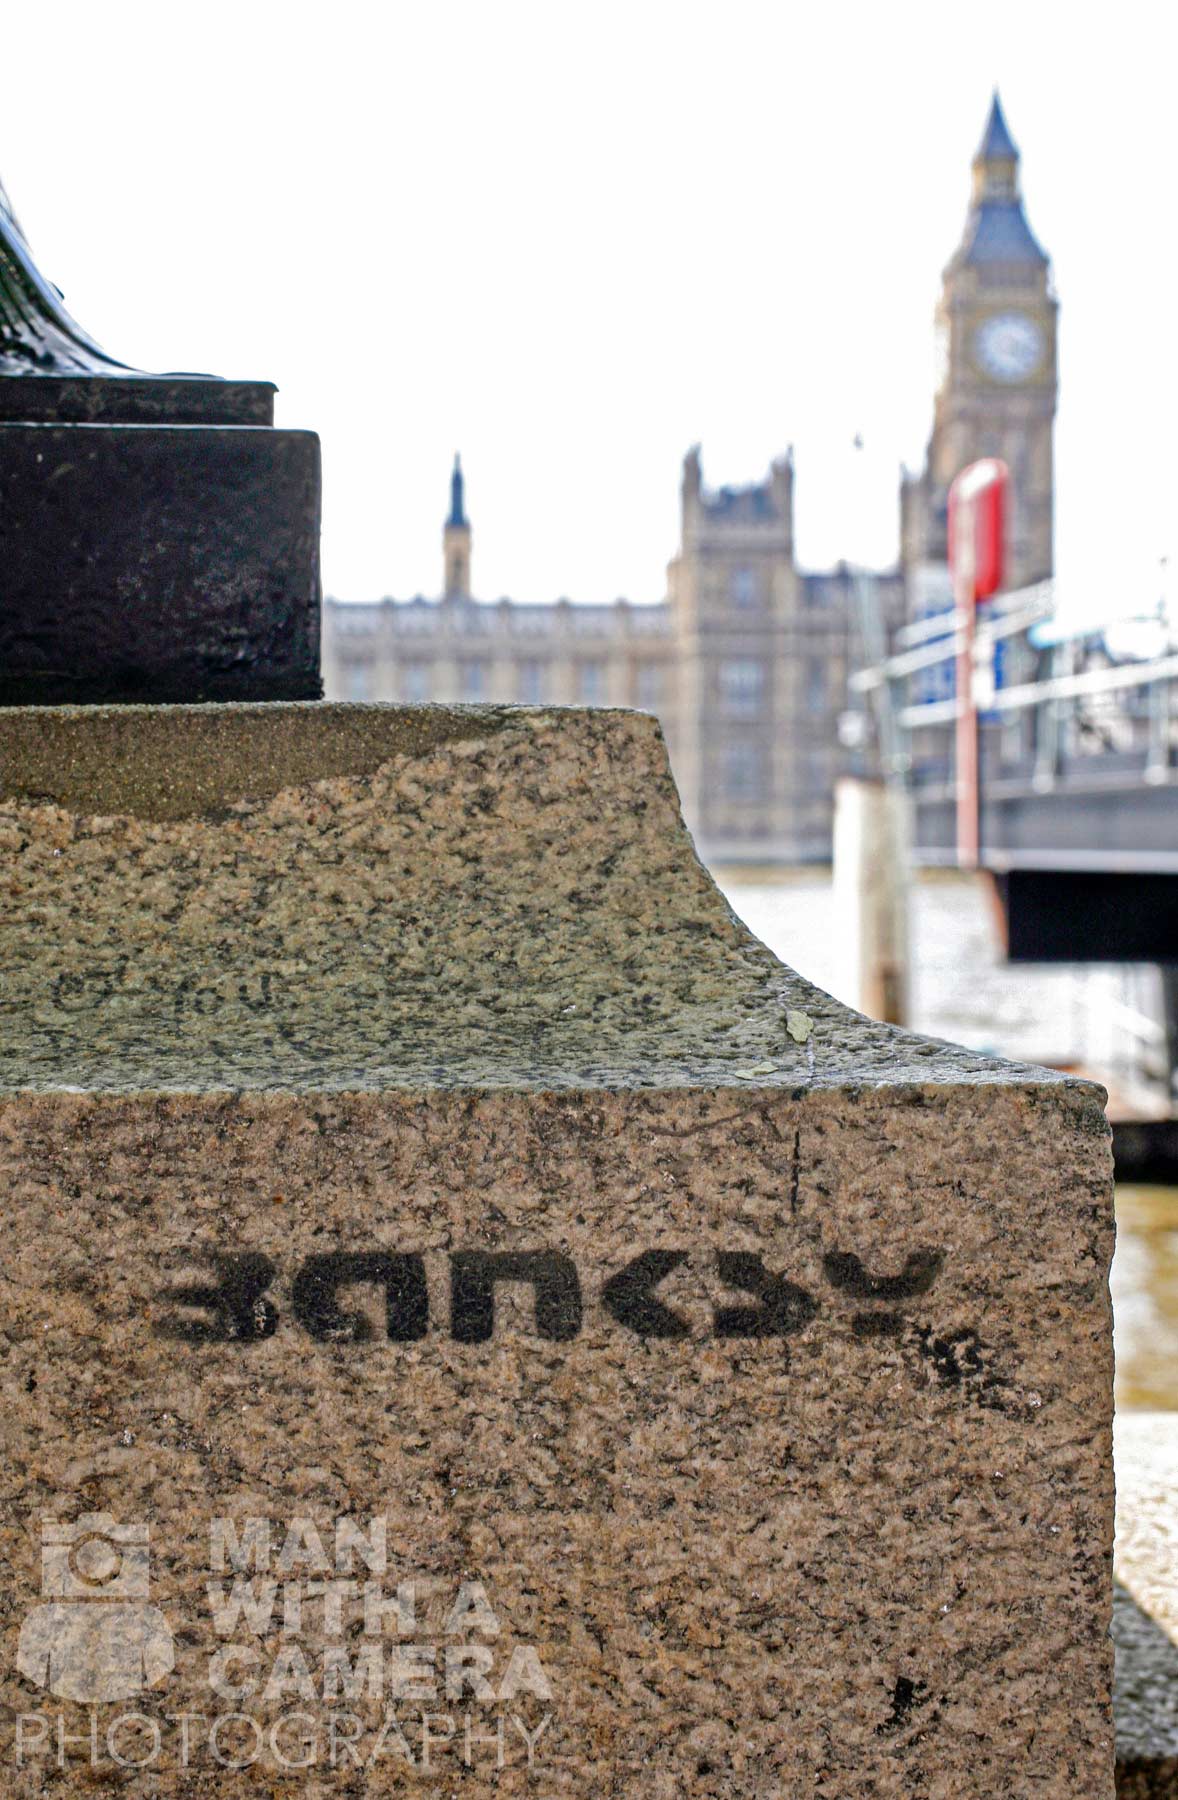 banksy-tag-westminster-south-bank